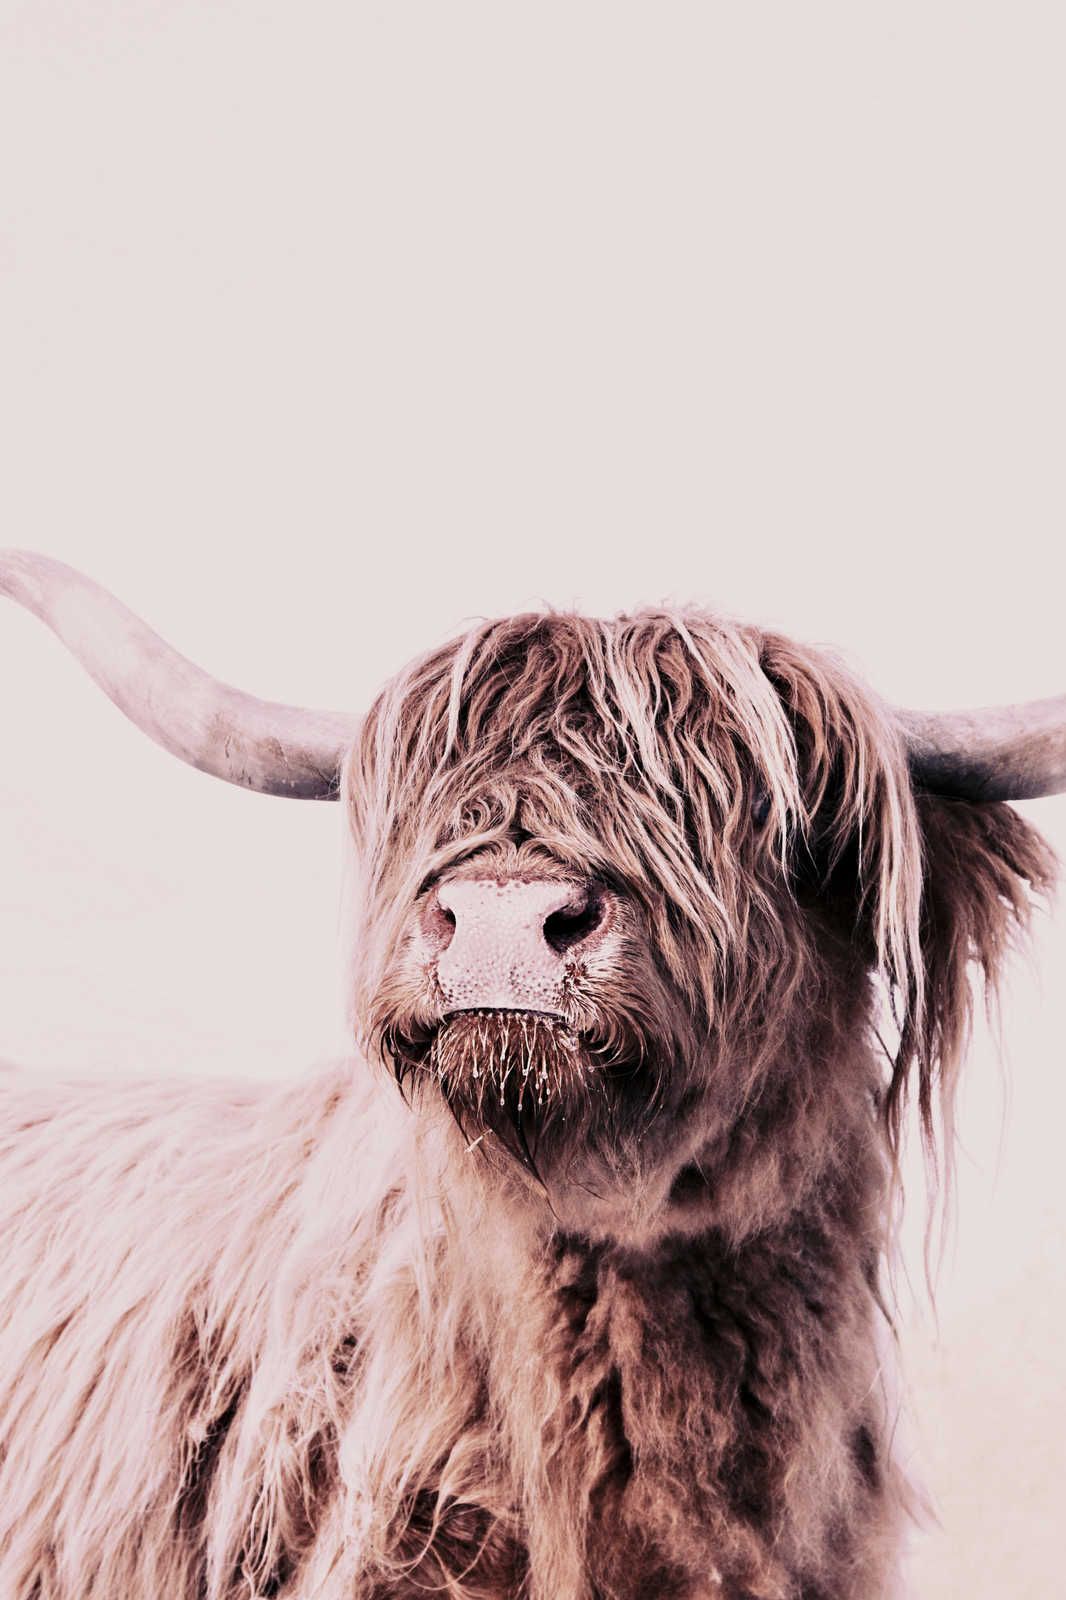             Canvas painting Highland Cattle Portrait in Sepia Style - 0,90 m x 0,60 m
        